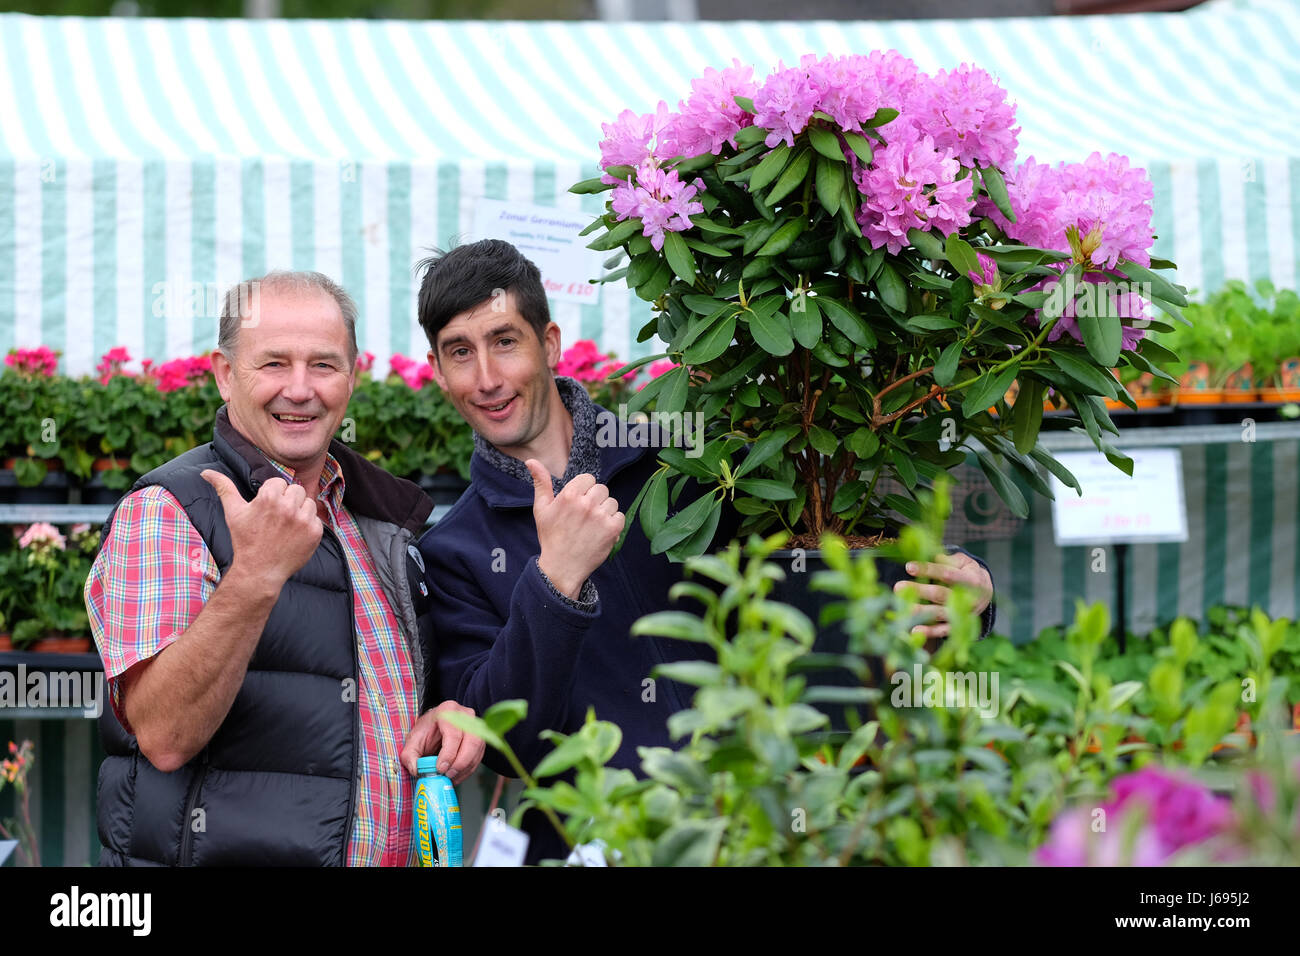 Royal Welsh Spring Festival, Builth Wells, Powys, Wales - May 2017 - Vendors at the flower stalls look more than happy with this beautiful azalea plant. Credit: Steven May/Alamy Live News Stock Photo